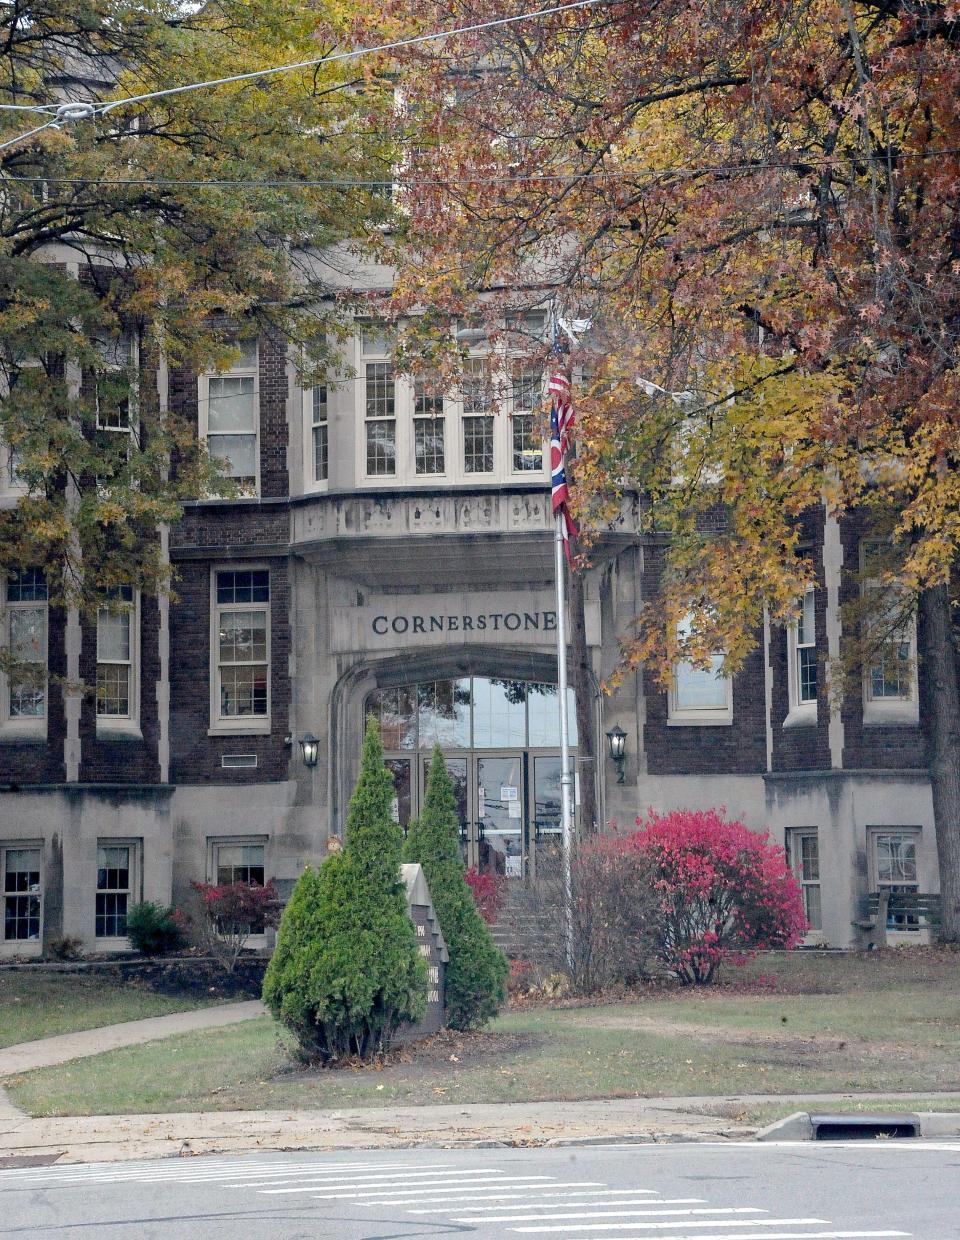 Cornerstone Elementary is over 100-years-old, having been built in 1908. Before being used as an elementary school, Principal Eric Vizzo said the building was the original Wooster High School until the 1990s.